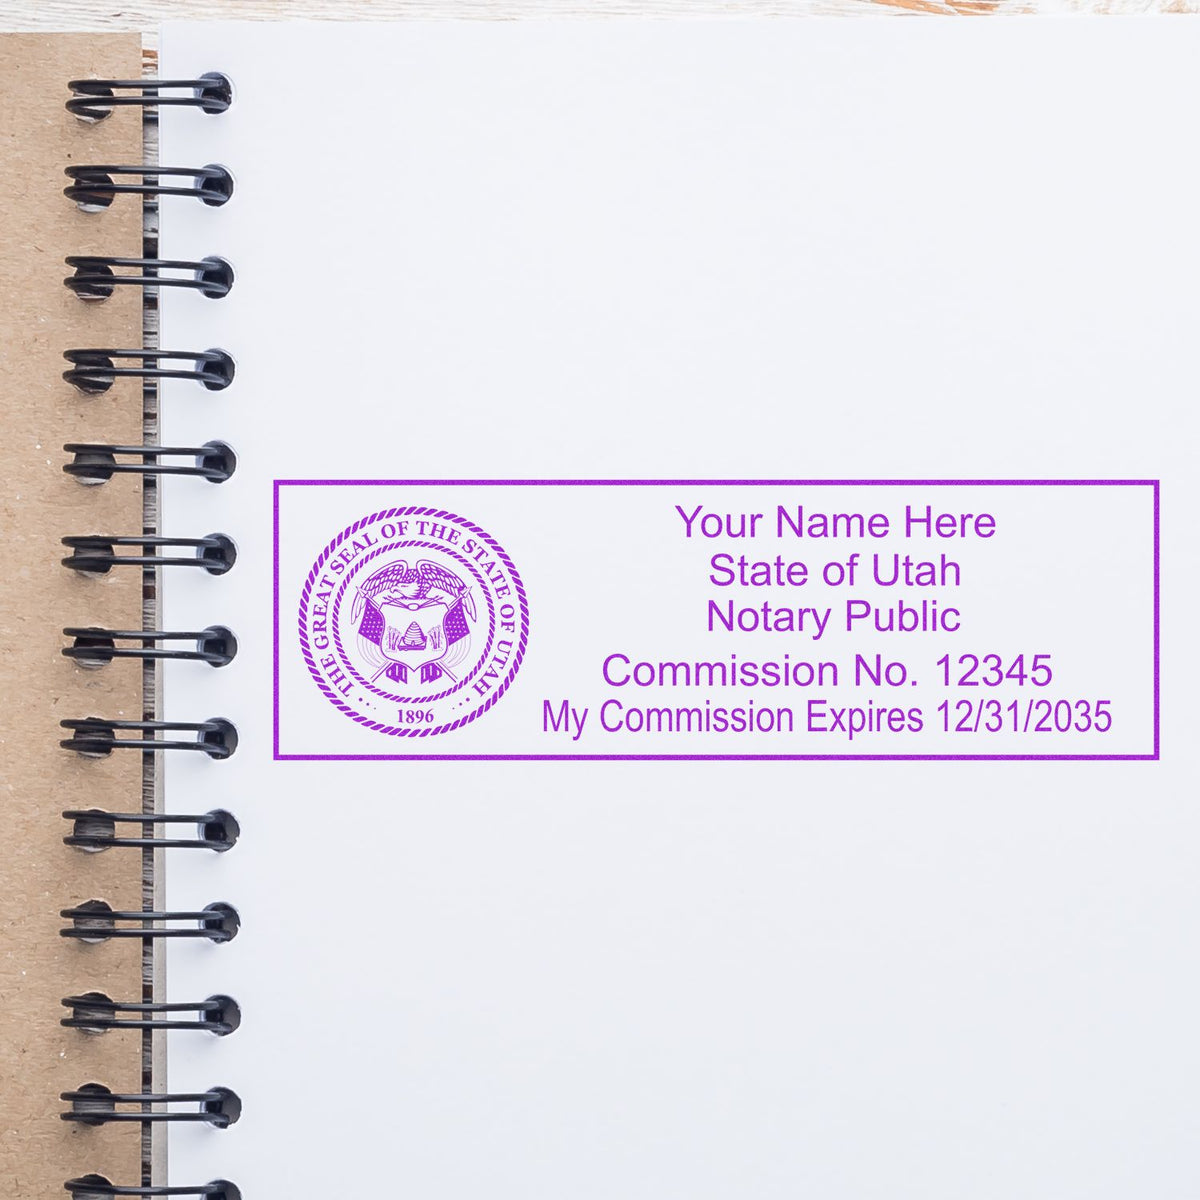 This paper is stamped with a sample imprint of the Slim Pre-Inked State Seal Notary Stamp for Utah, signifying its quality and reliability.